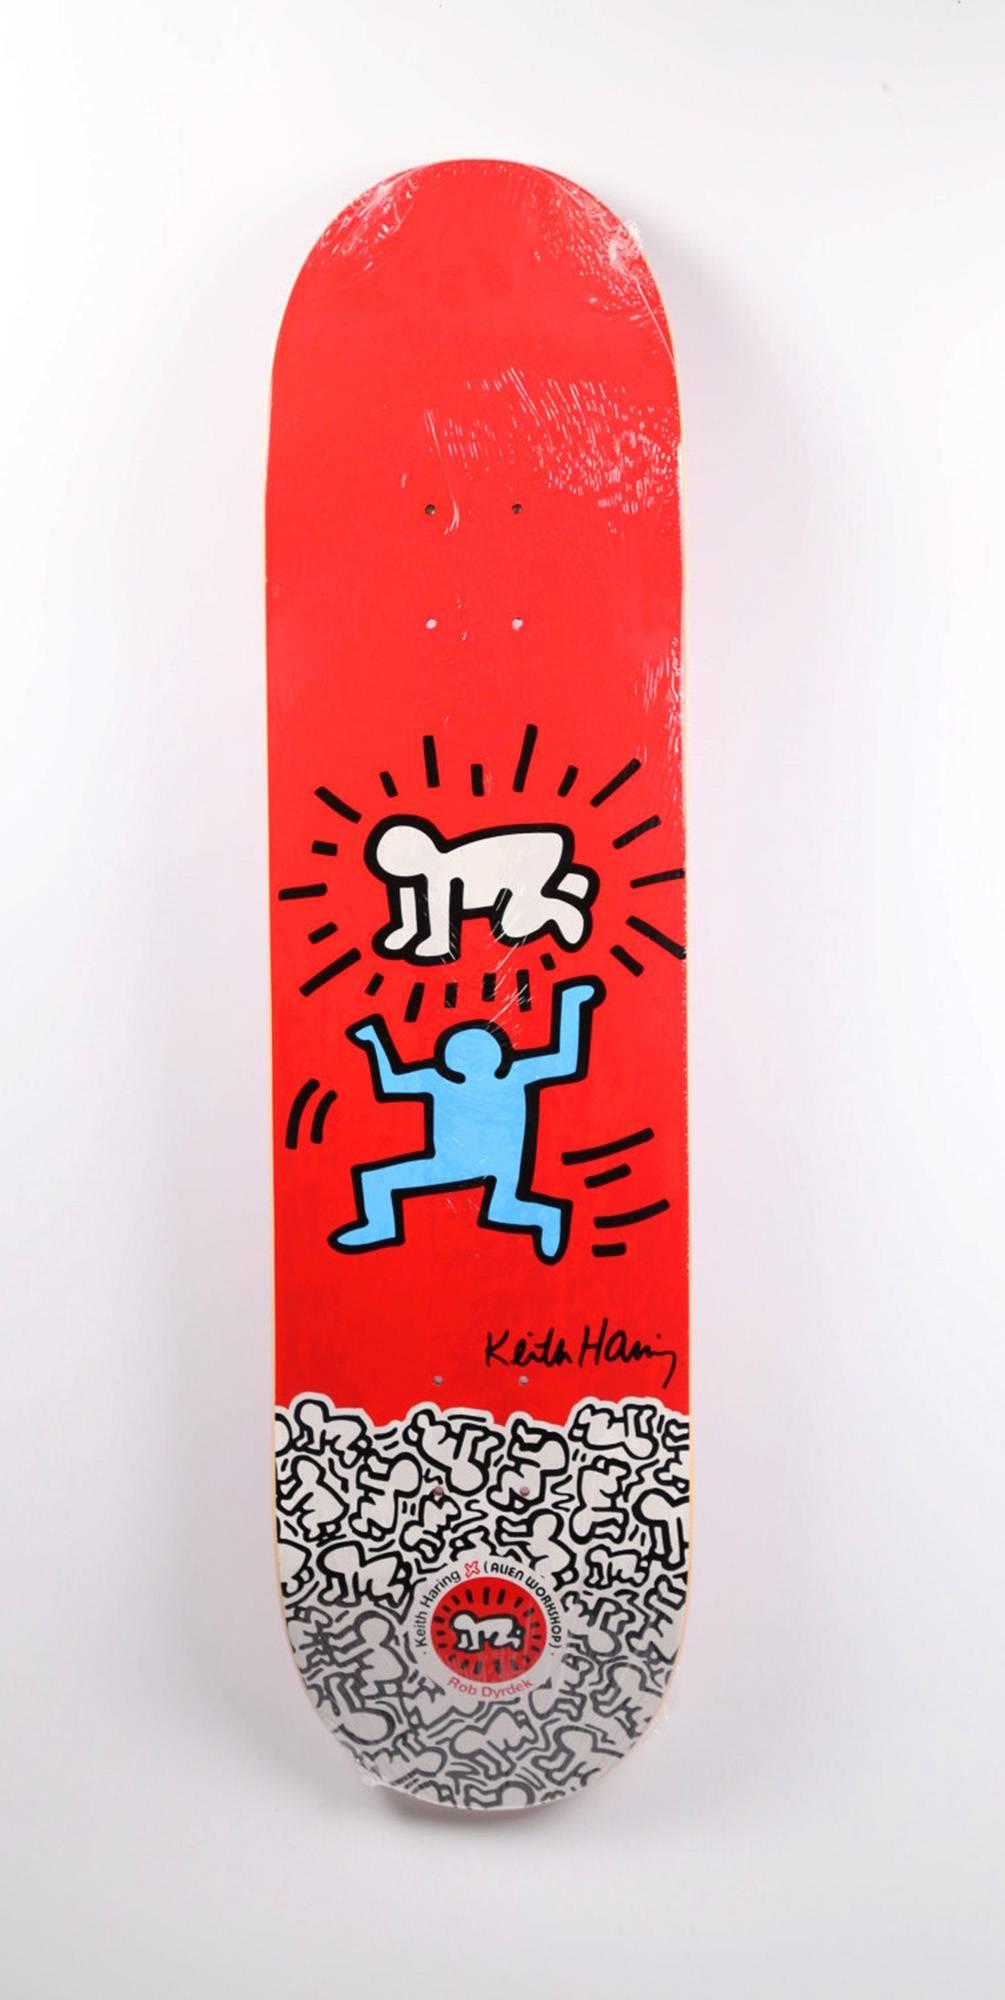 These work originated circa 2012 as a result of the collaboration between Alien Workshop and the Keith Haring Foundation. Each deck is new and in its original packaging. 

A brilliant series that makes for stand-out wall-art that hangs with